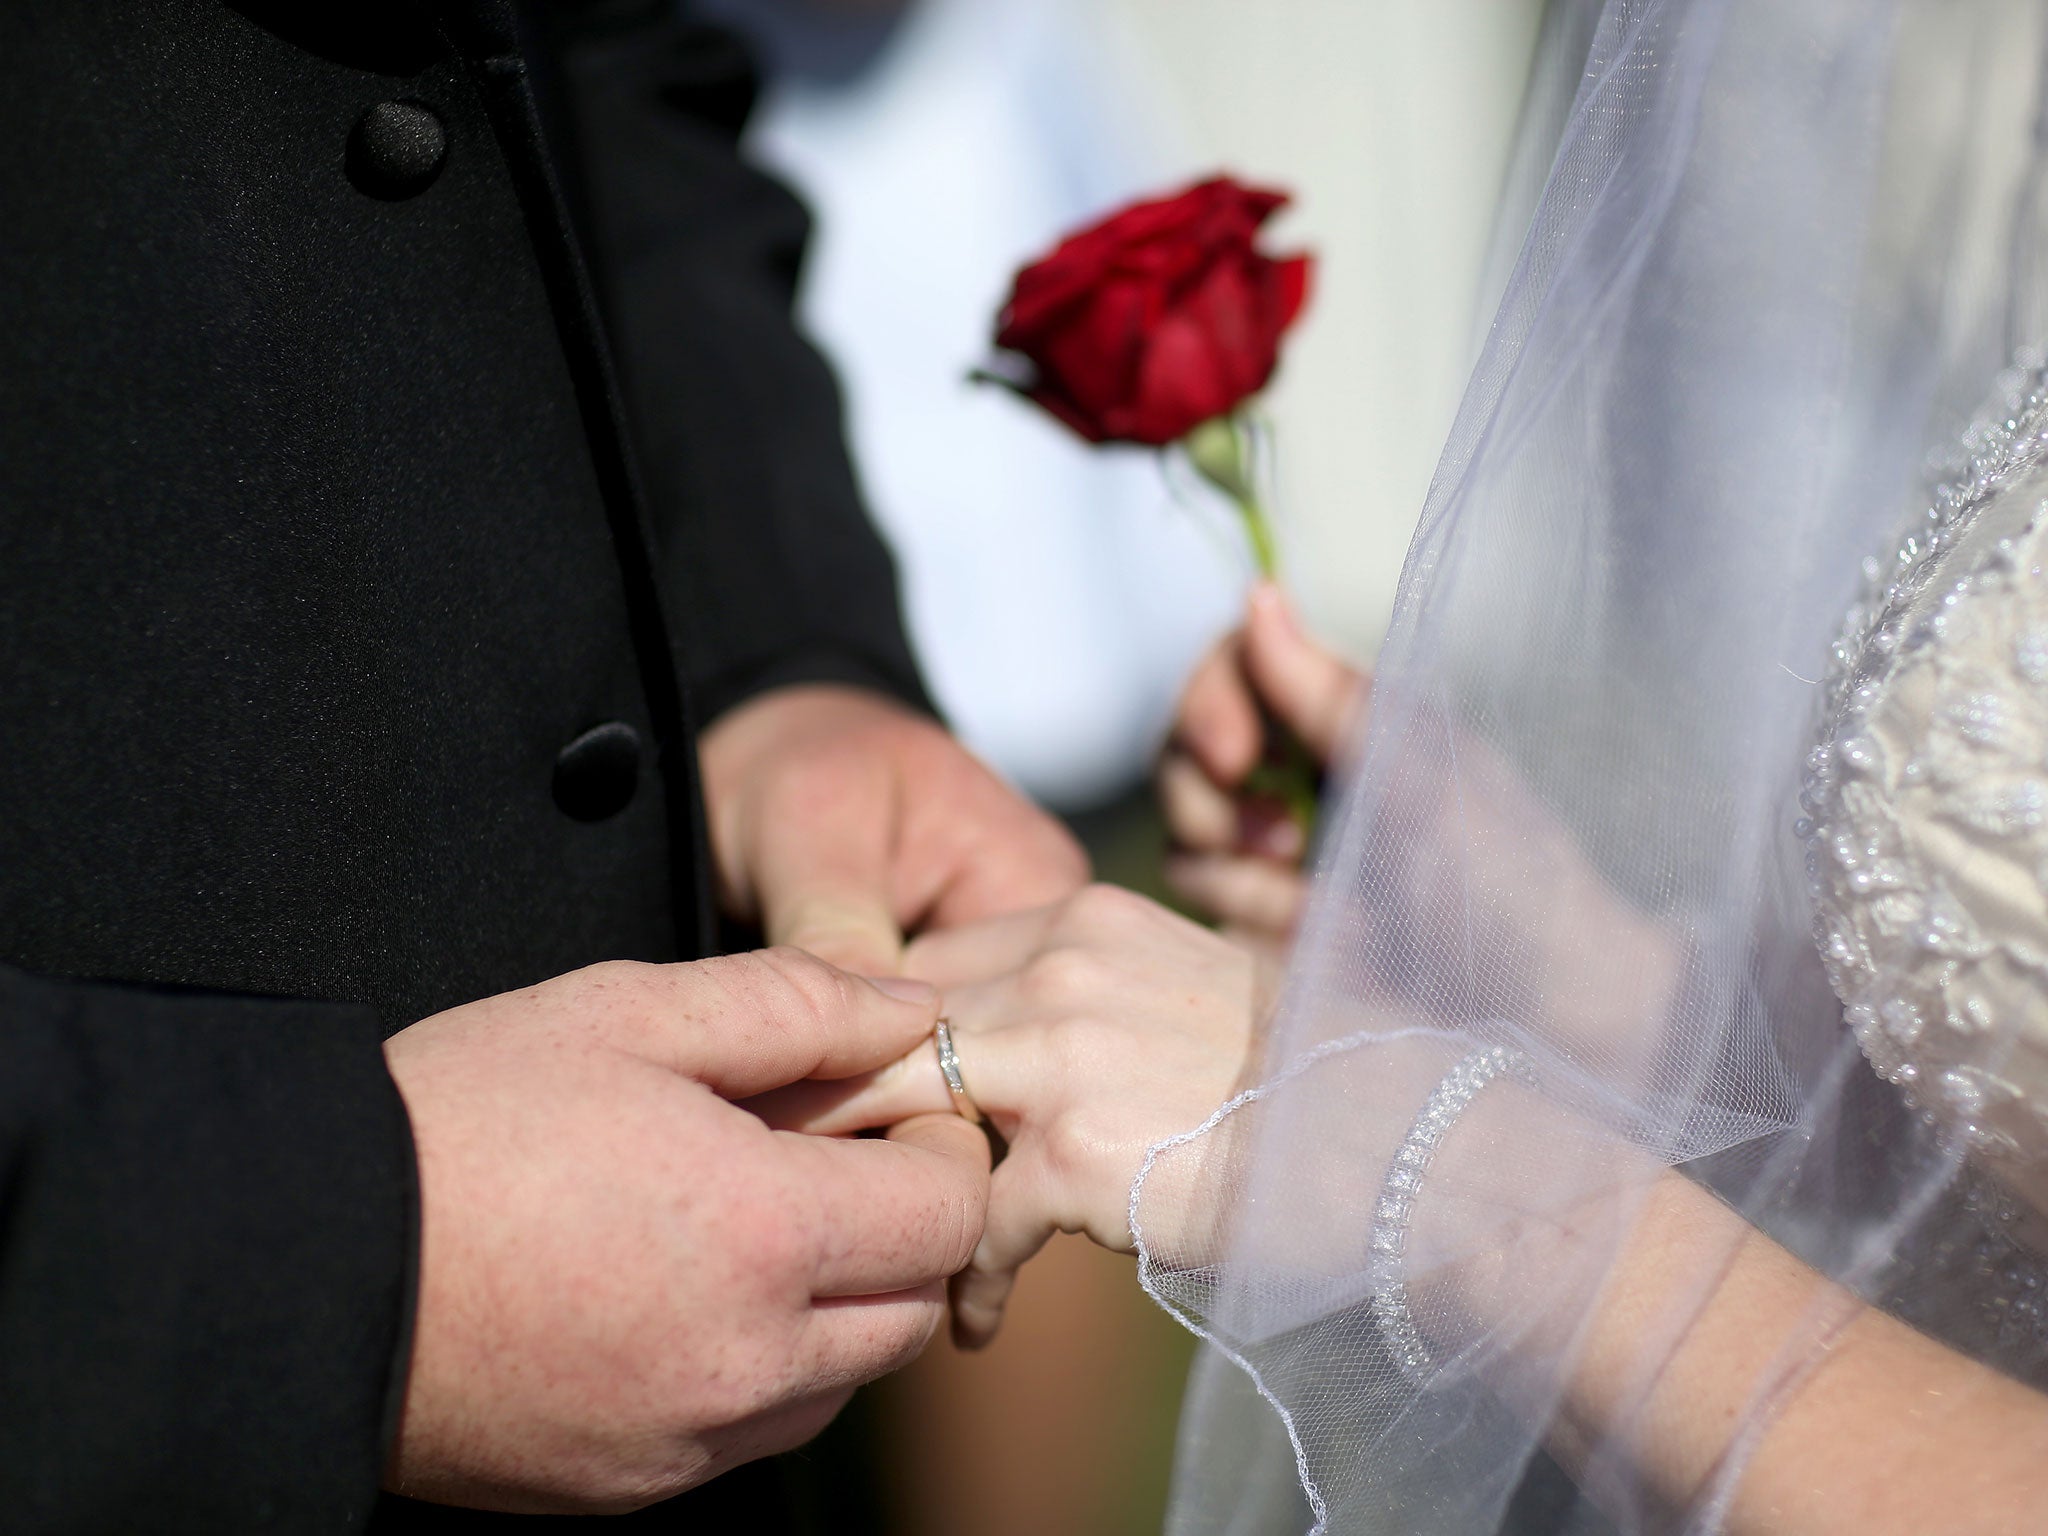 A firm has launched a wedding money lending service with a twist